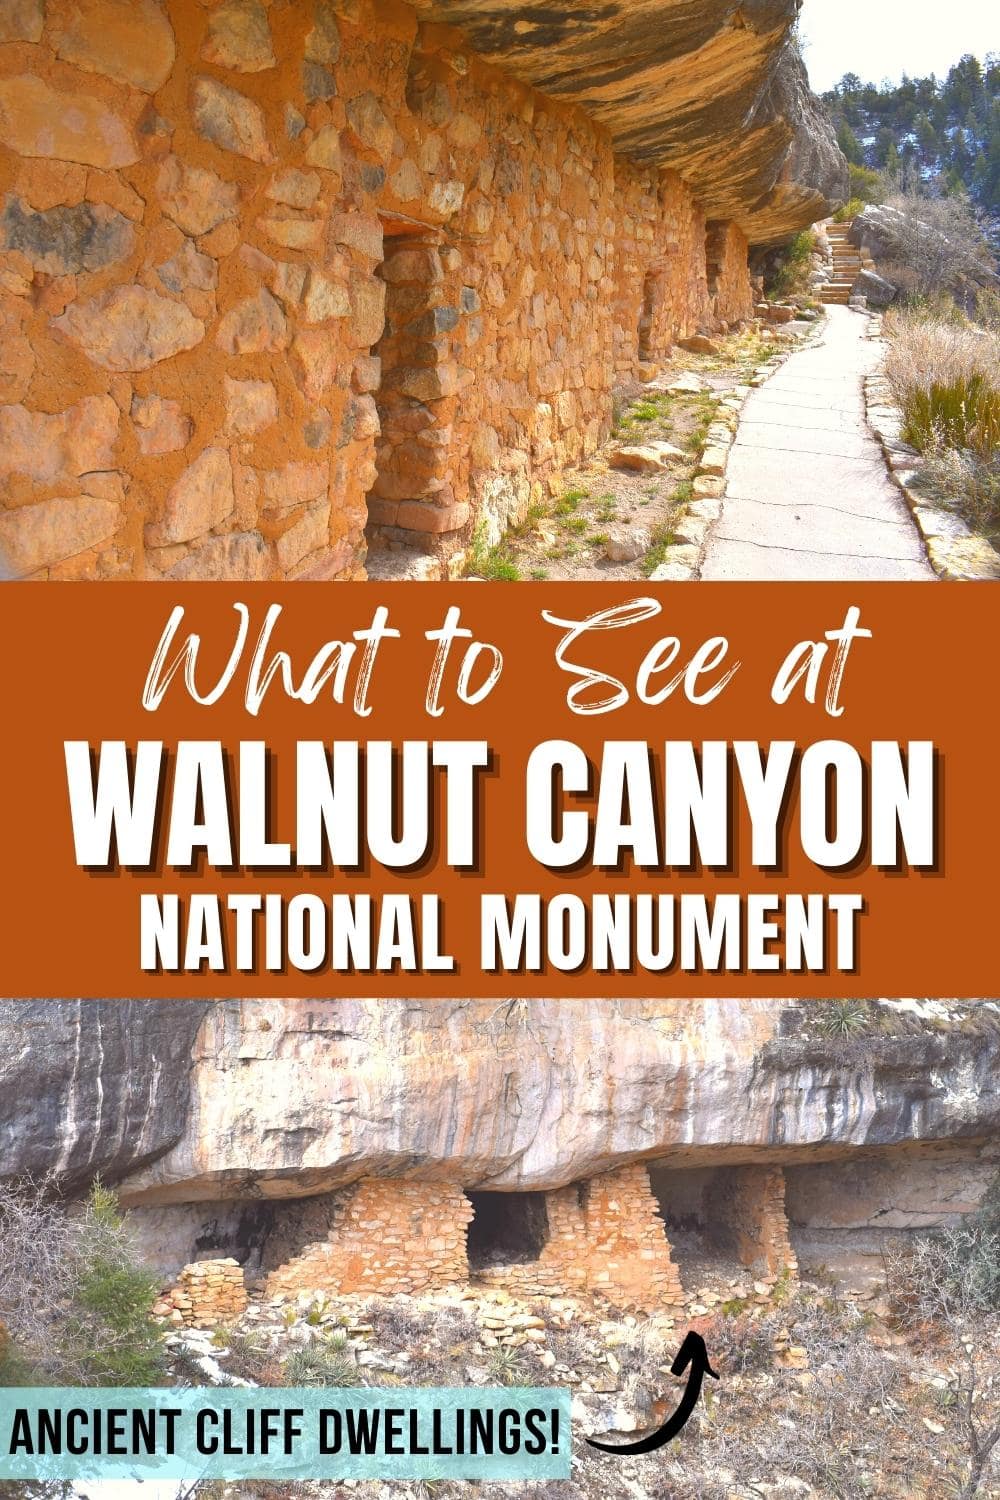 Is Walnut Canyon Worth Visiting? Yes! Here’s Why.